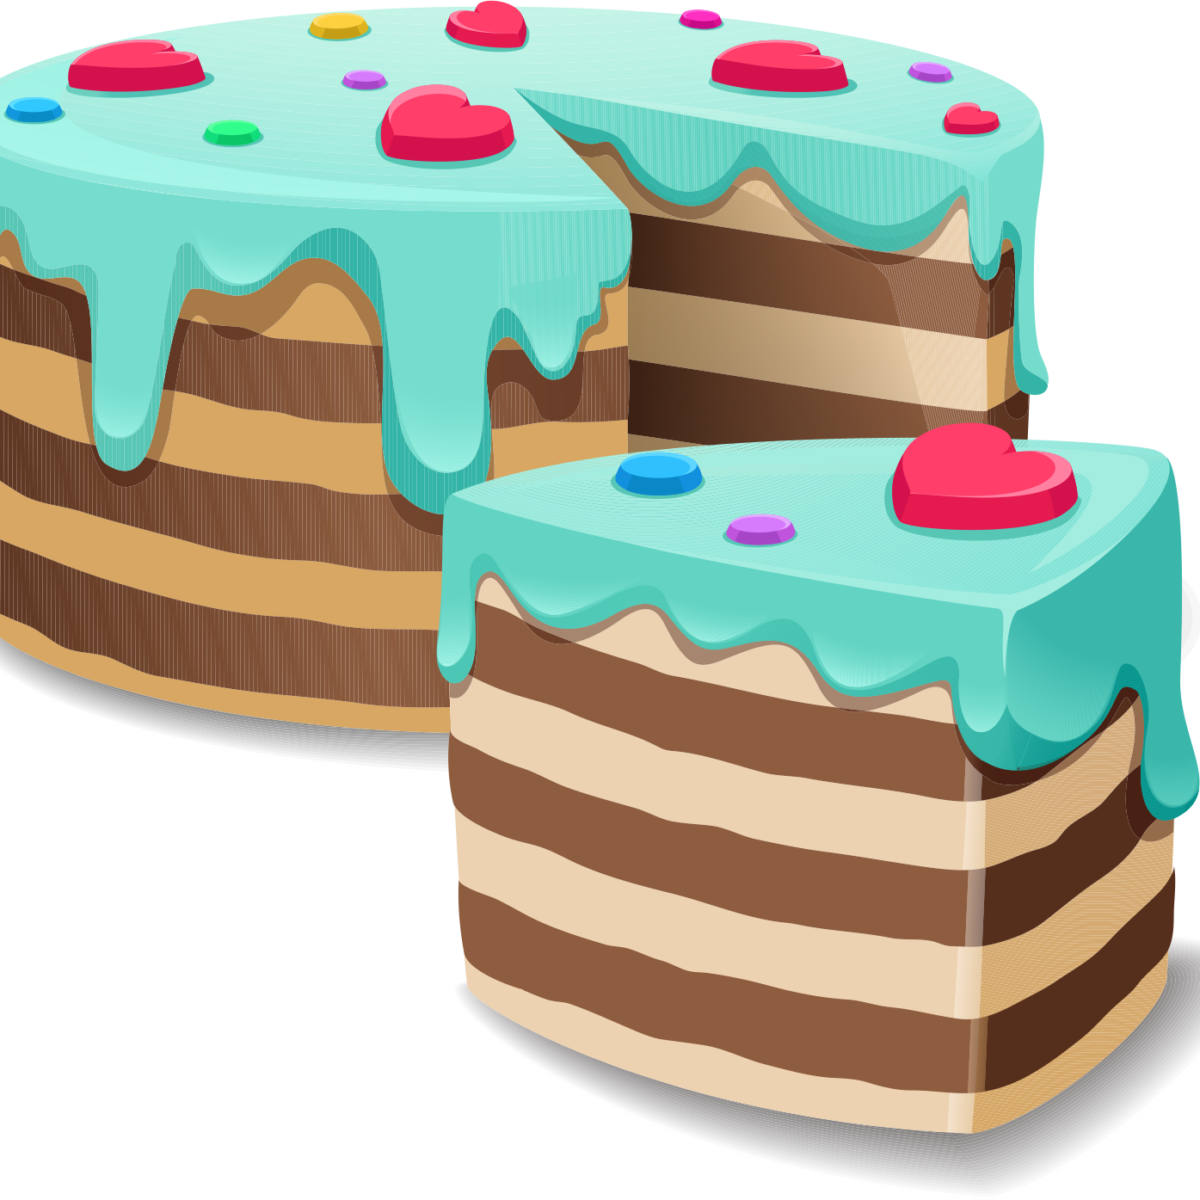 Free download | Cake with a Candle icon Facebook Pack icon Birthday cake  icon, Food Icon, Birthday , Computer, Emoji transparent background PNG  clipart | HiClipart